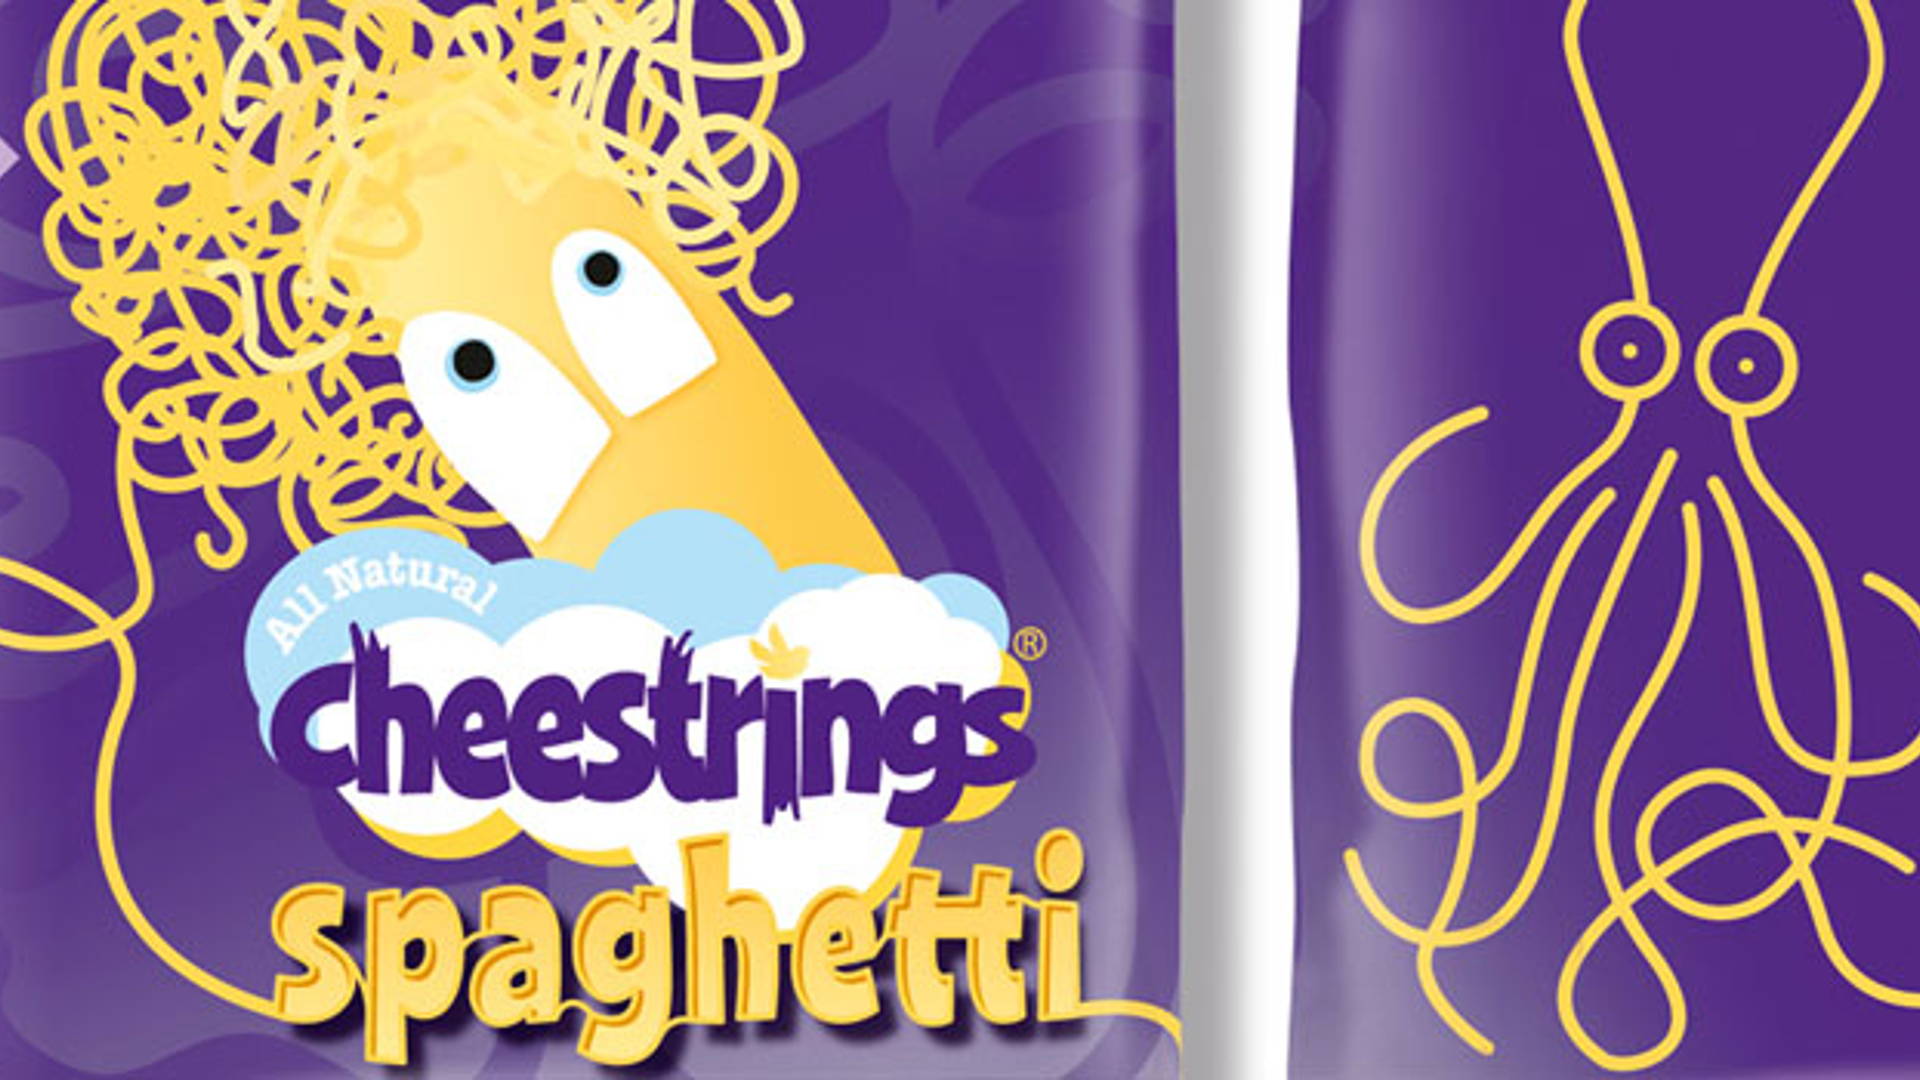 Featured image for Cheestrings Spaghetti